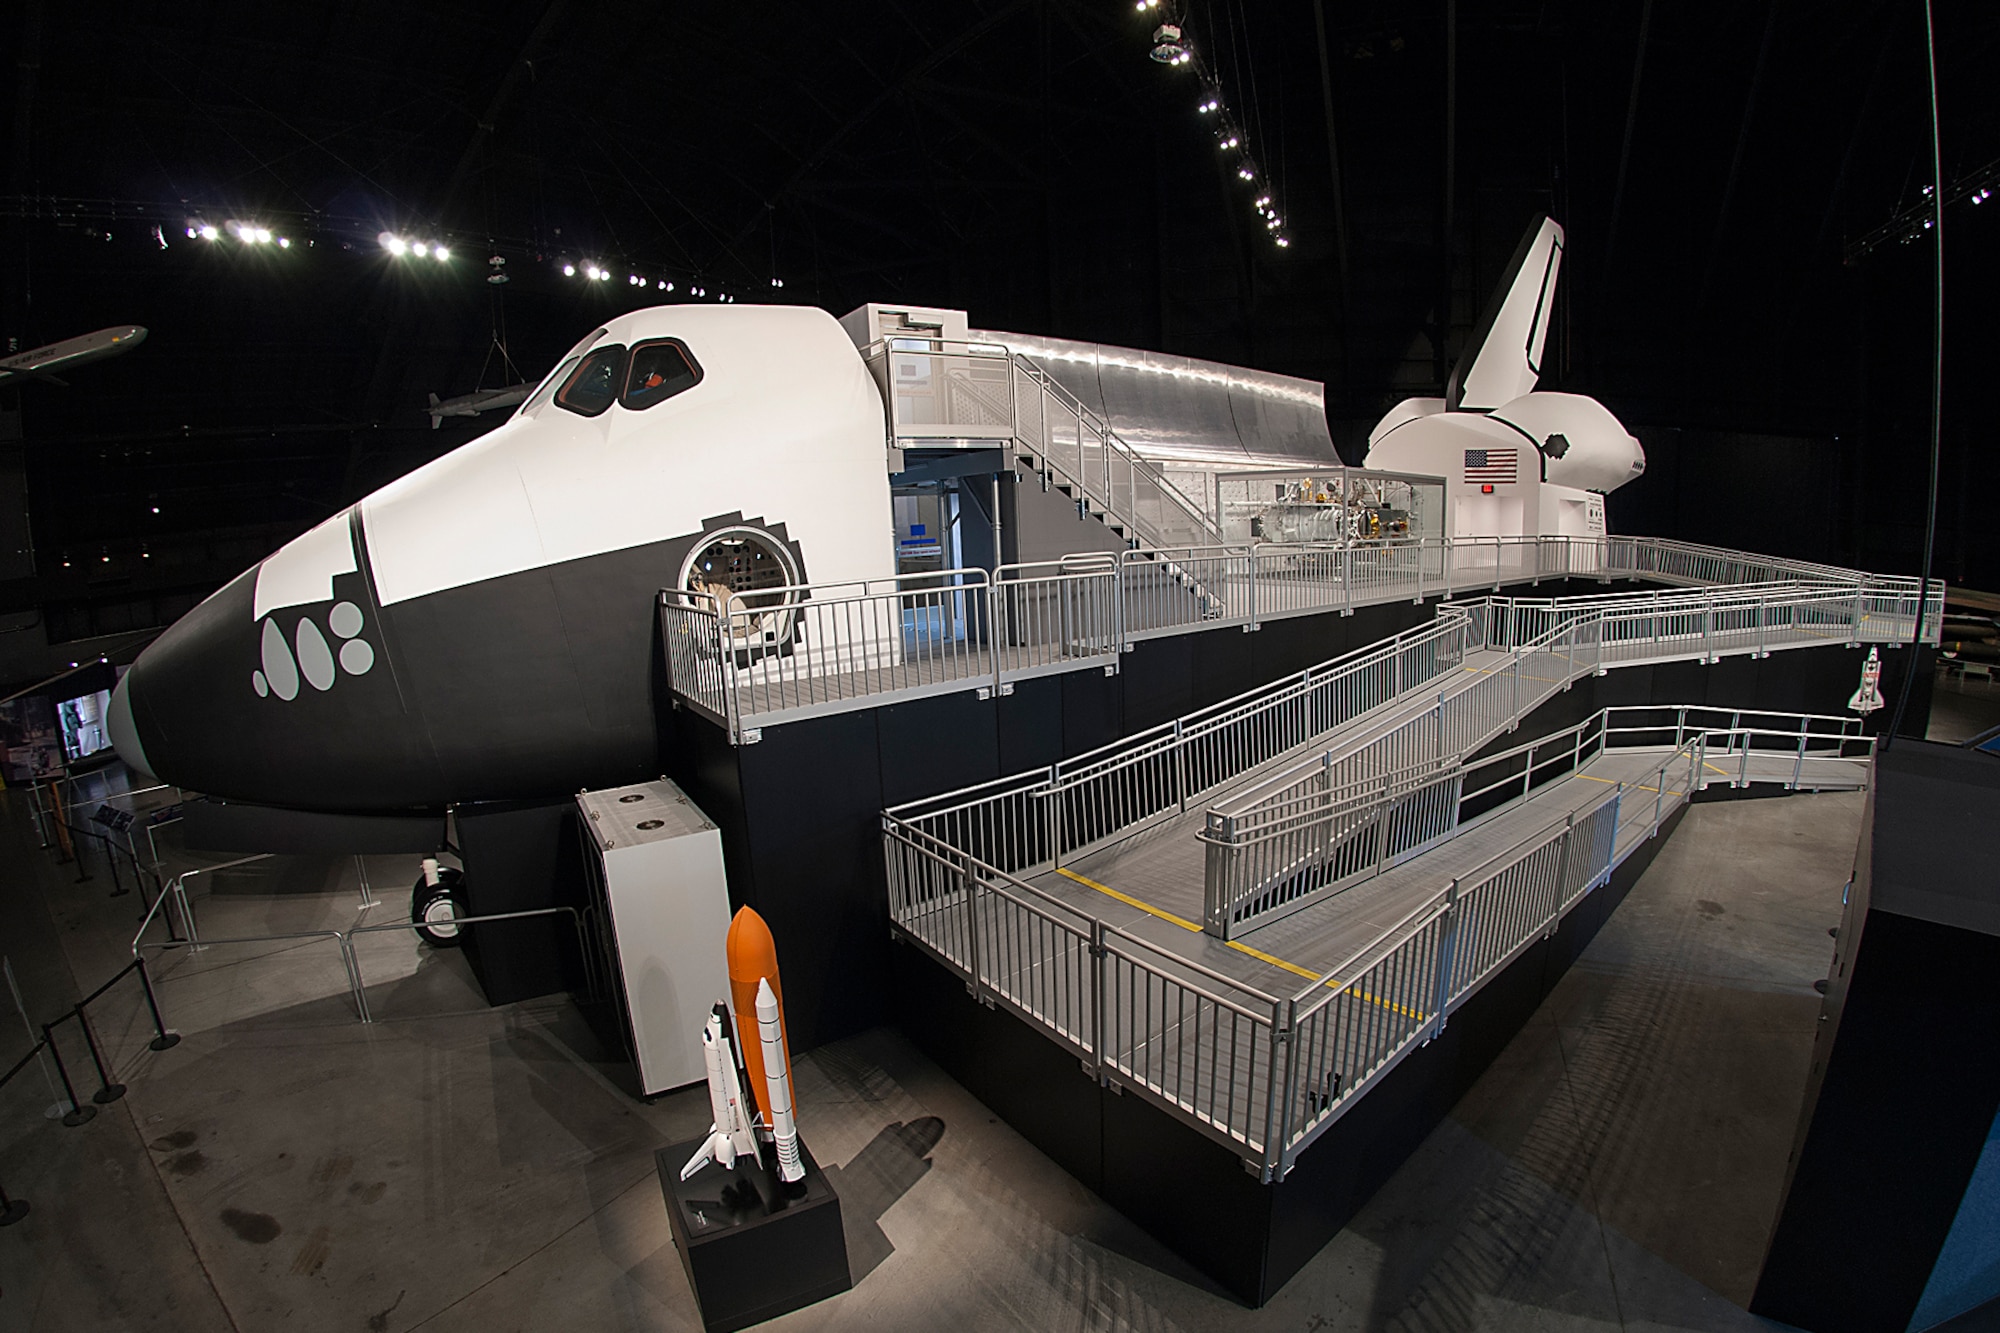 The Space Shuttle Exhibit featuring NASA's first Crew Compartment Trainer (CCT) in the Cold War Gallery at the National Museum of the U.S. Air Force. (Photo courtesy of Rob Clements, Display Dynamics, Inc.)